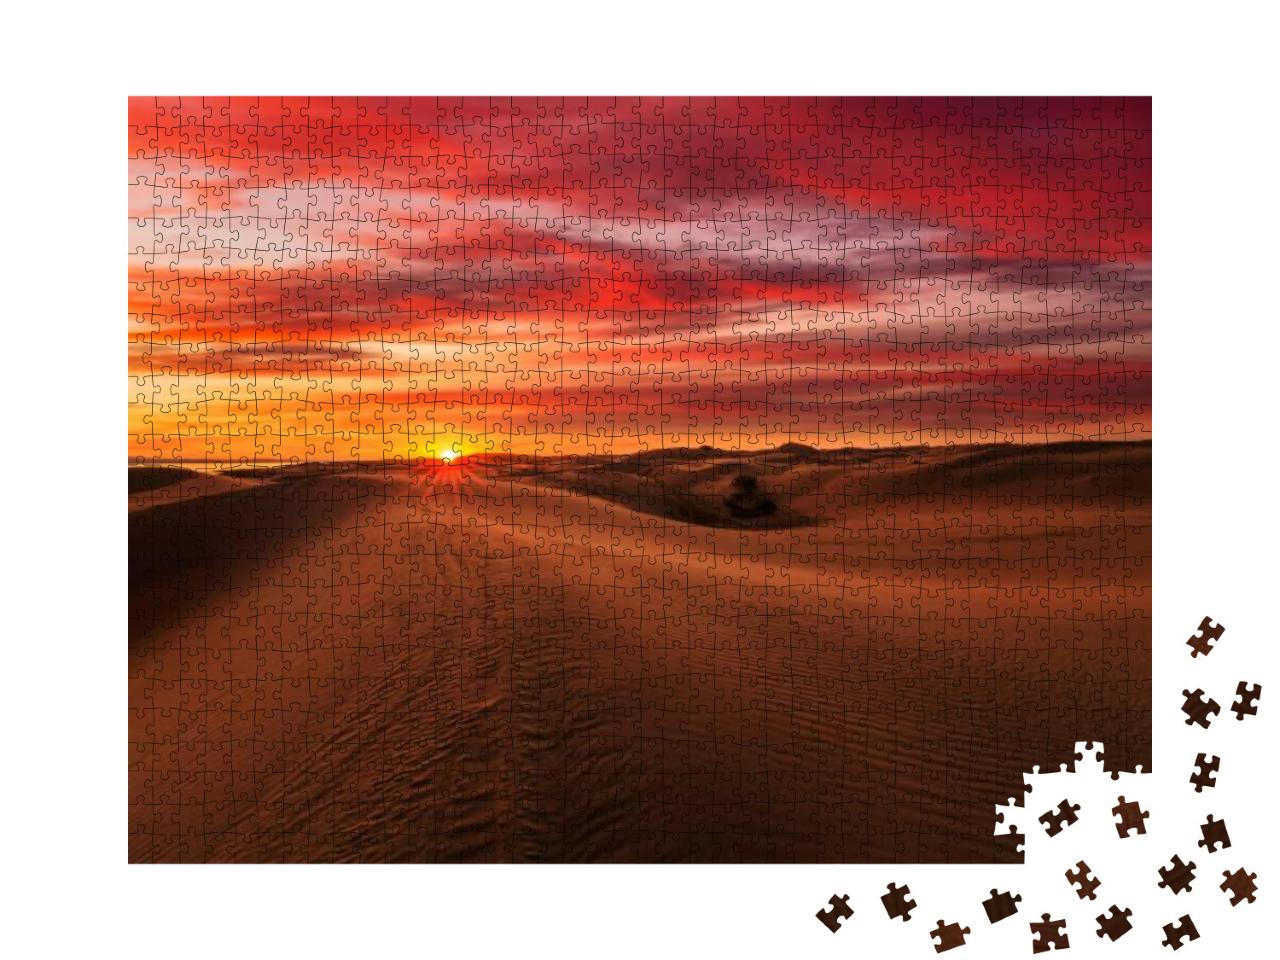 Beautiful Sunset Over the Sand Dunes in the Arabian Empty... Jigsaw Puzzle with 1000 pieces